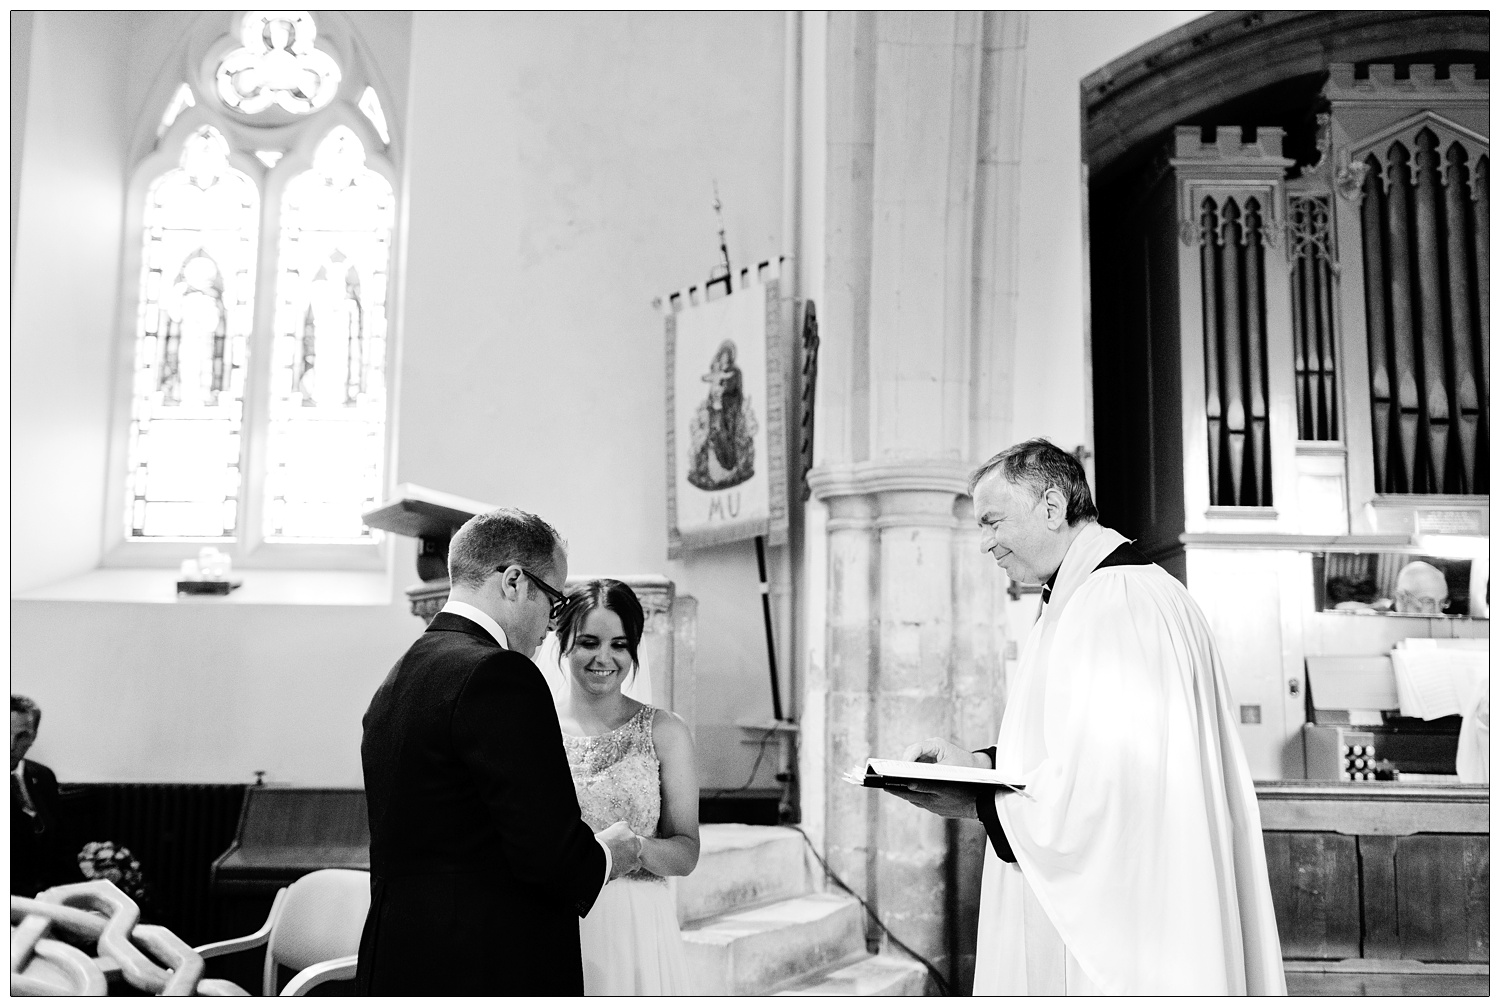 Bride, groom and vicar during wedding ceremony at St Thomas' Church Bradwell-on-Sea. The pipe organ is on the right.